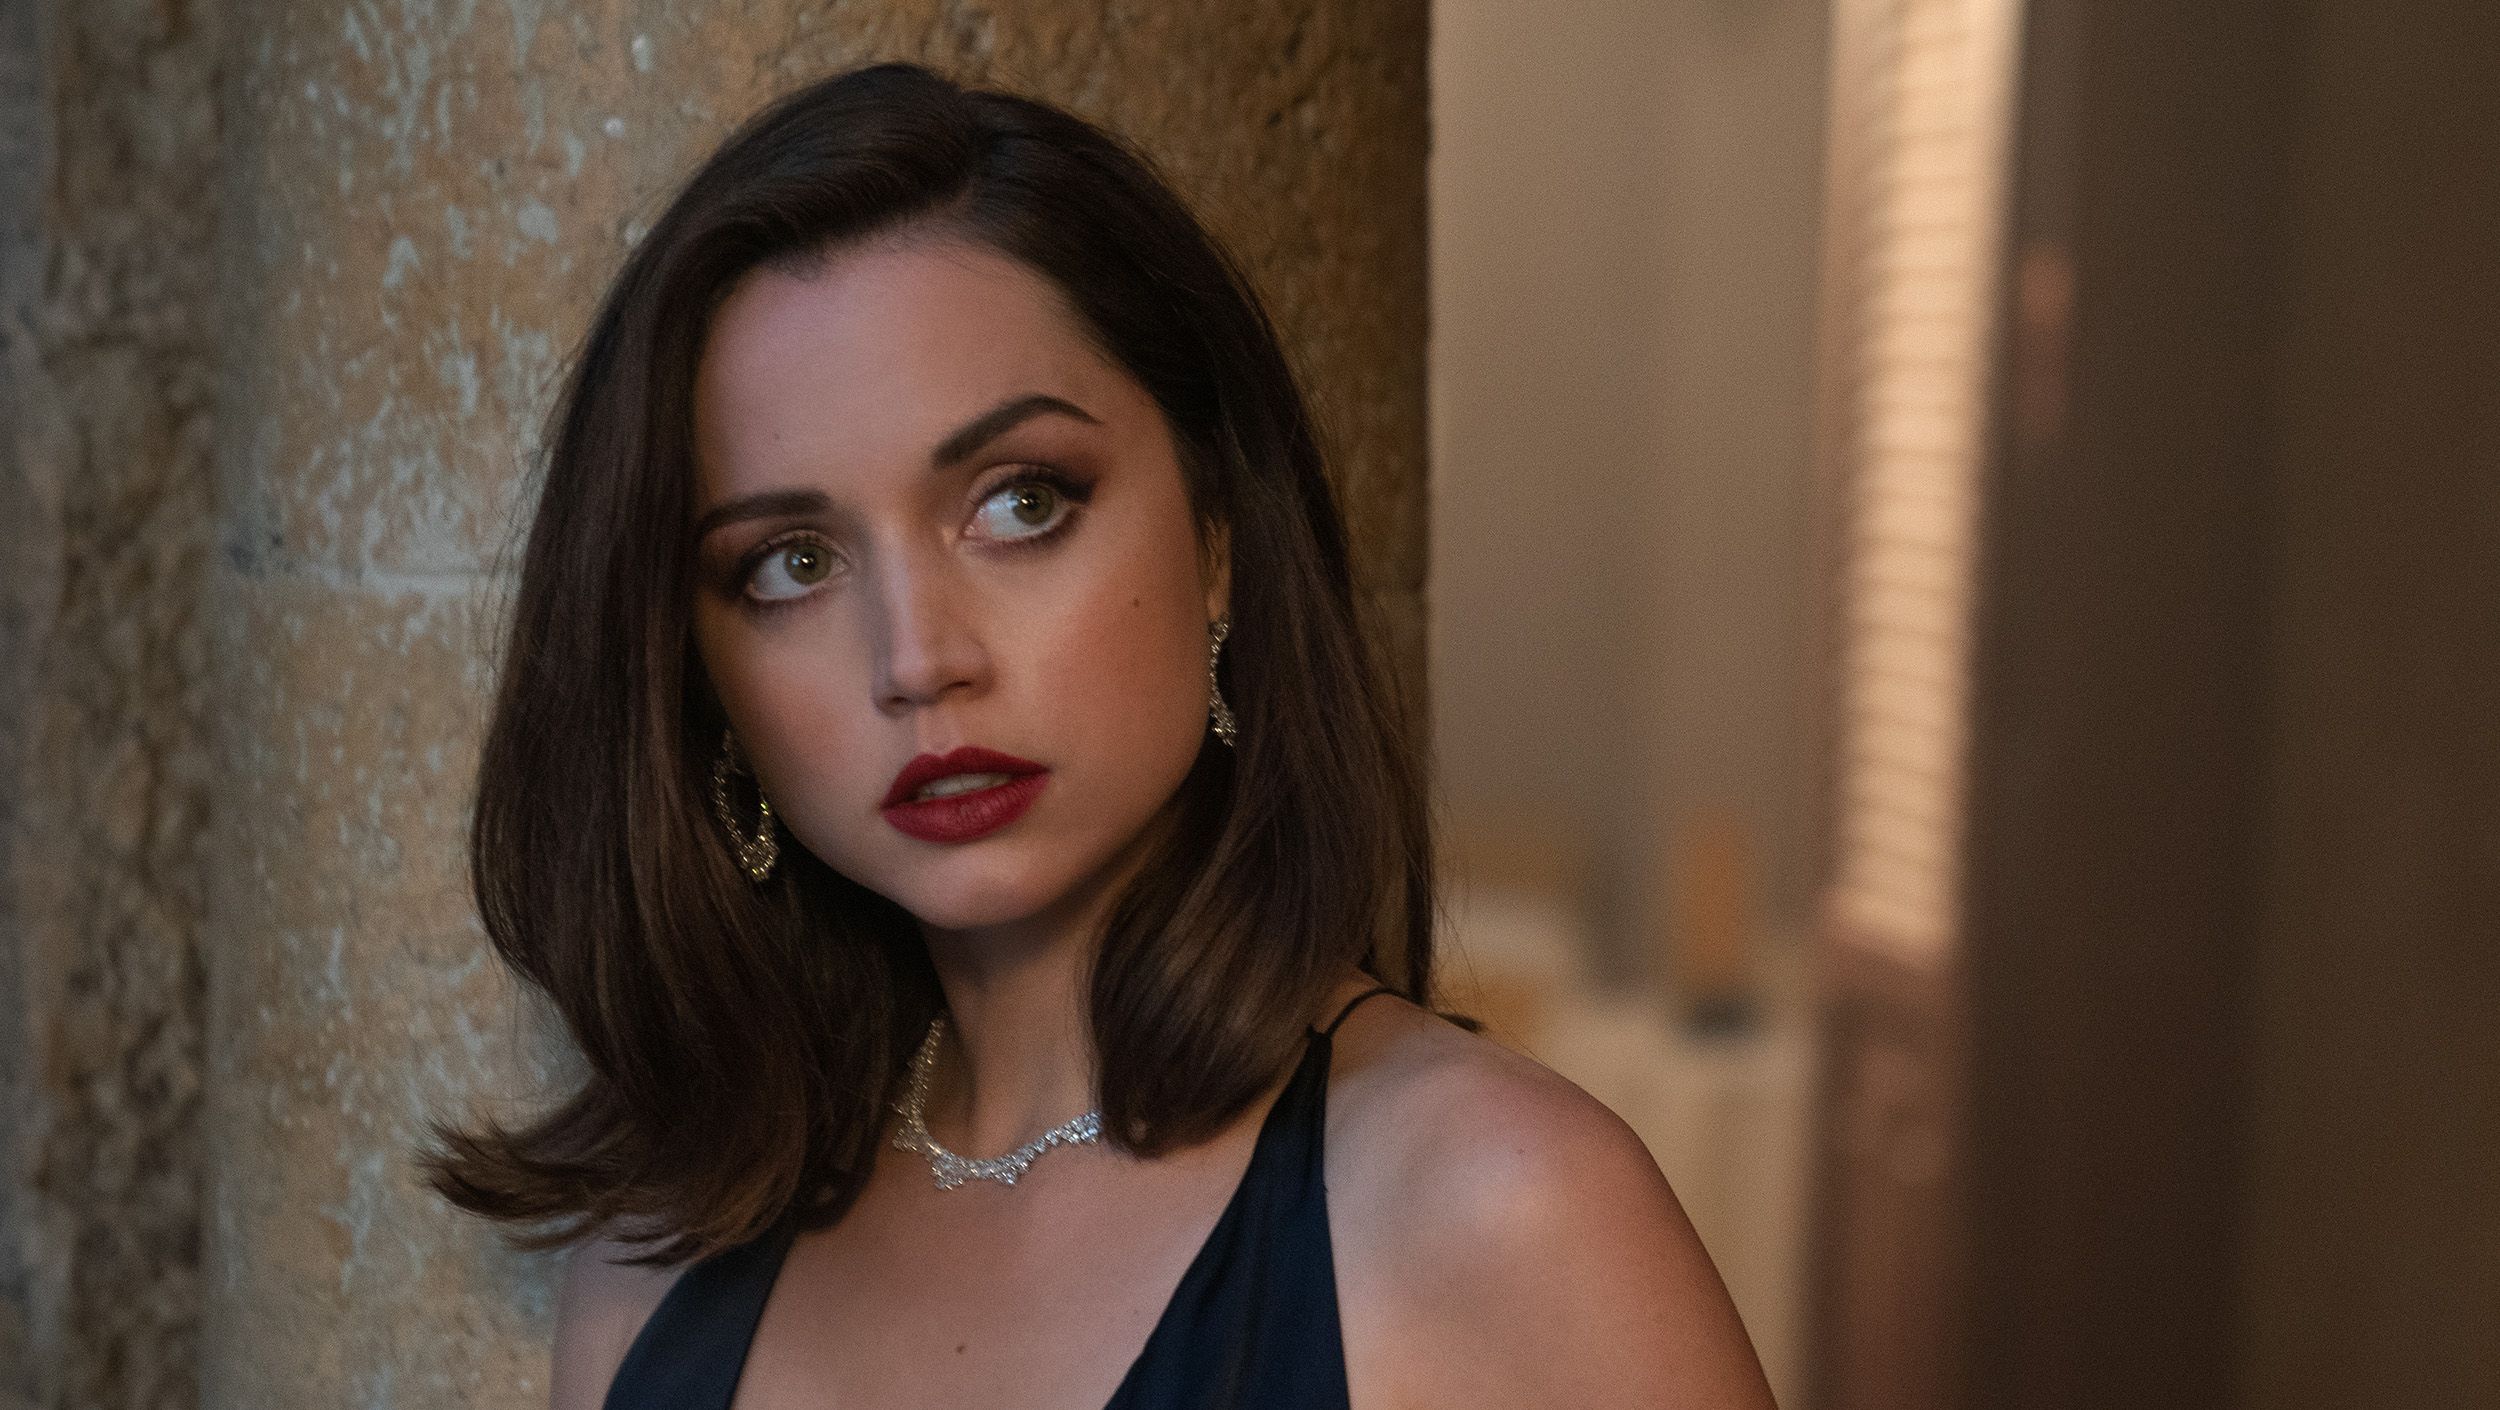 EXCLUSIVE: Ana de Armas in Chopard for the new James Bond movie